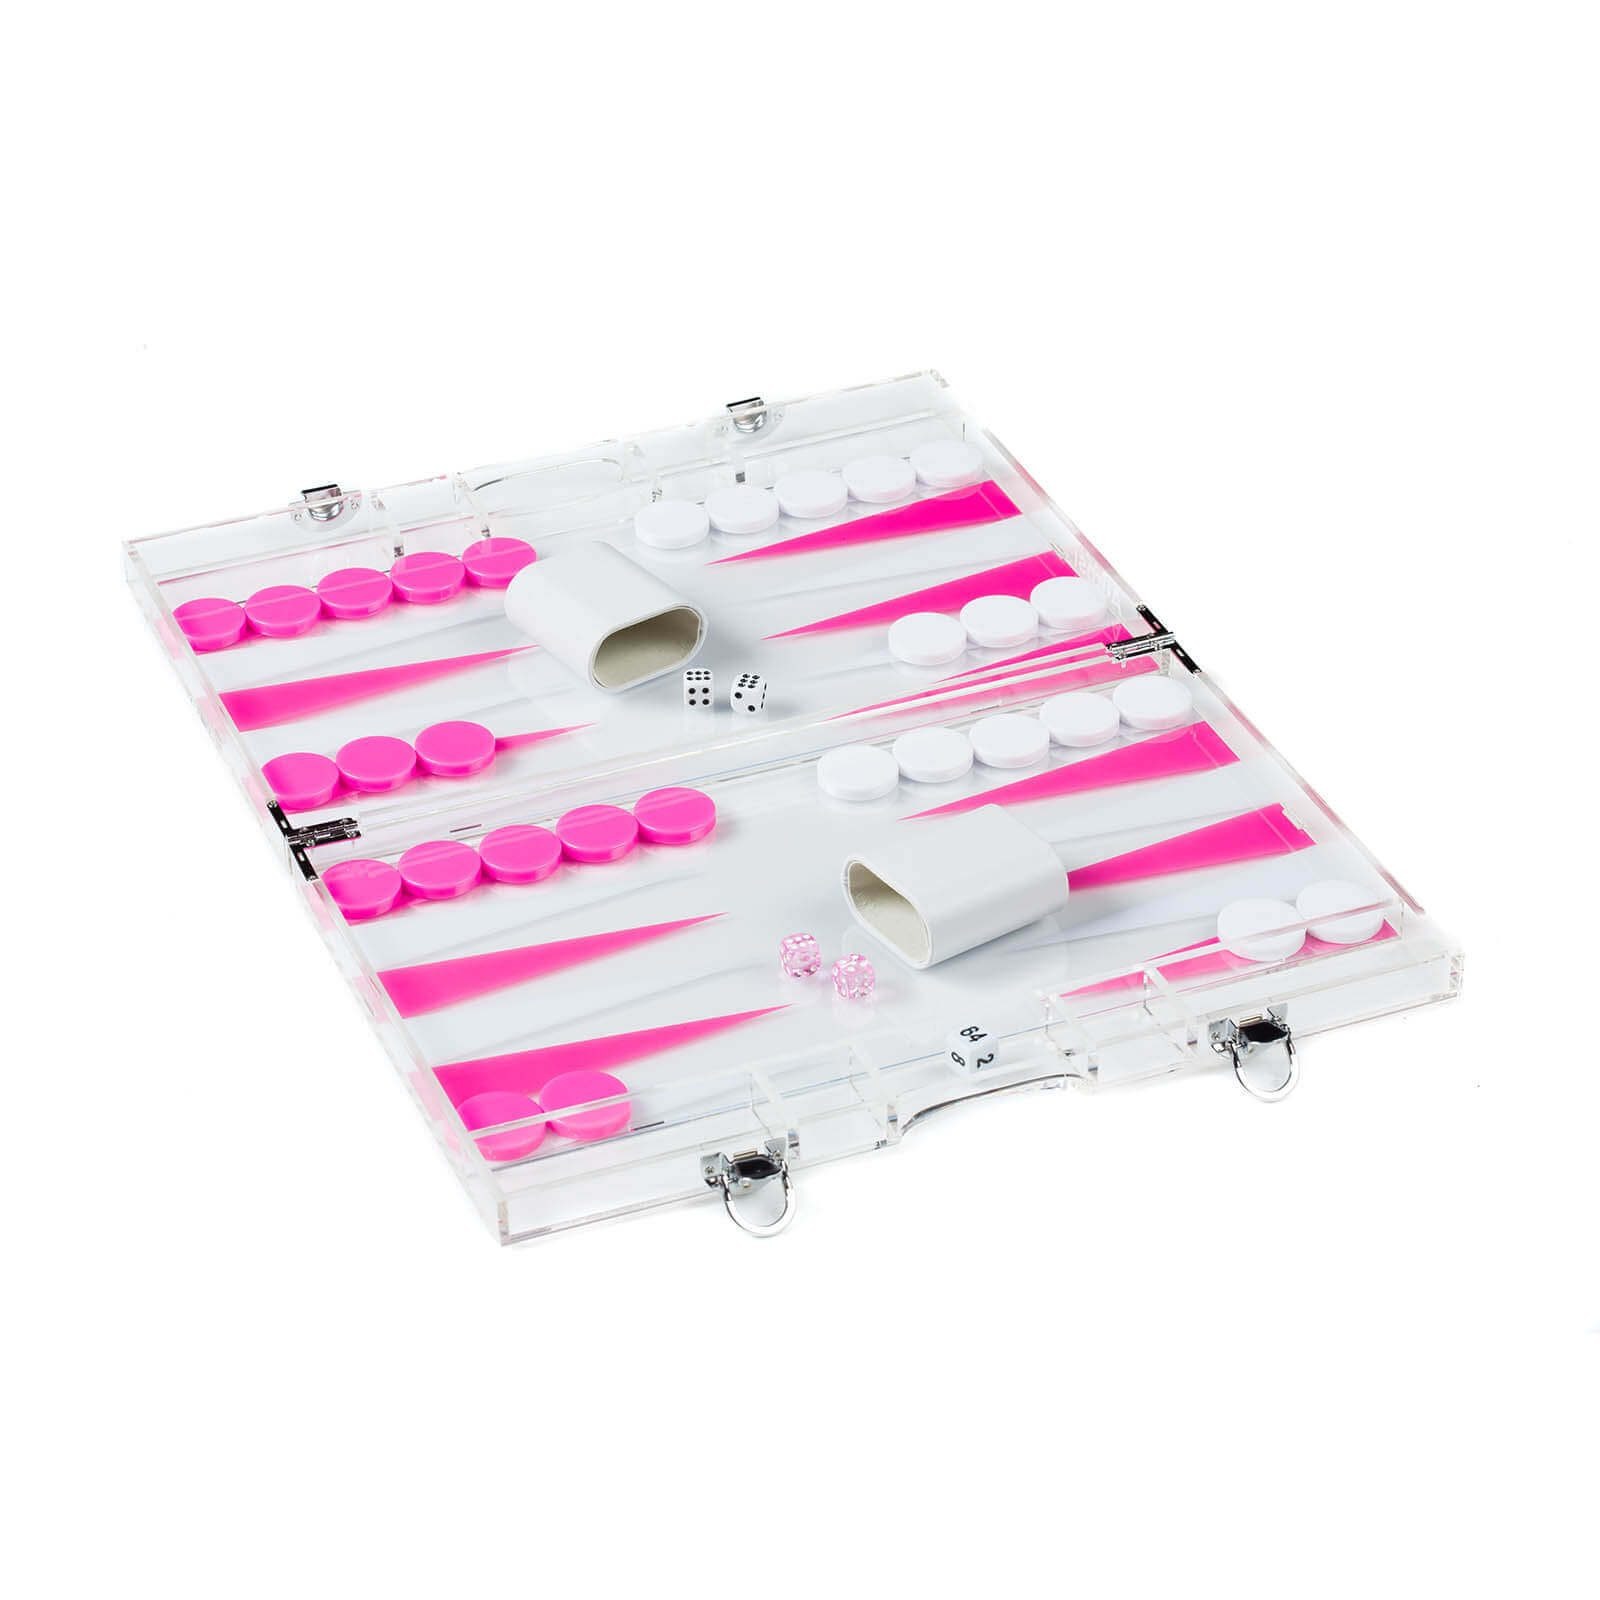 Acrylic Backgammon Set in Pink and White Open